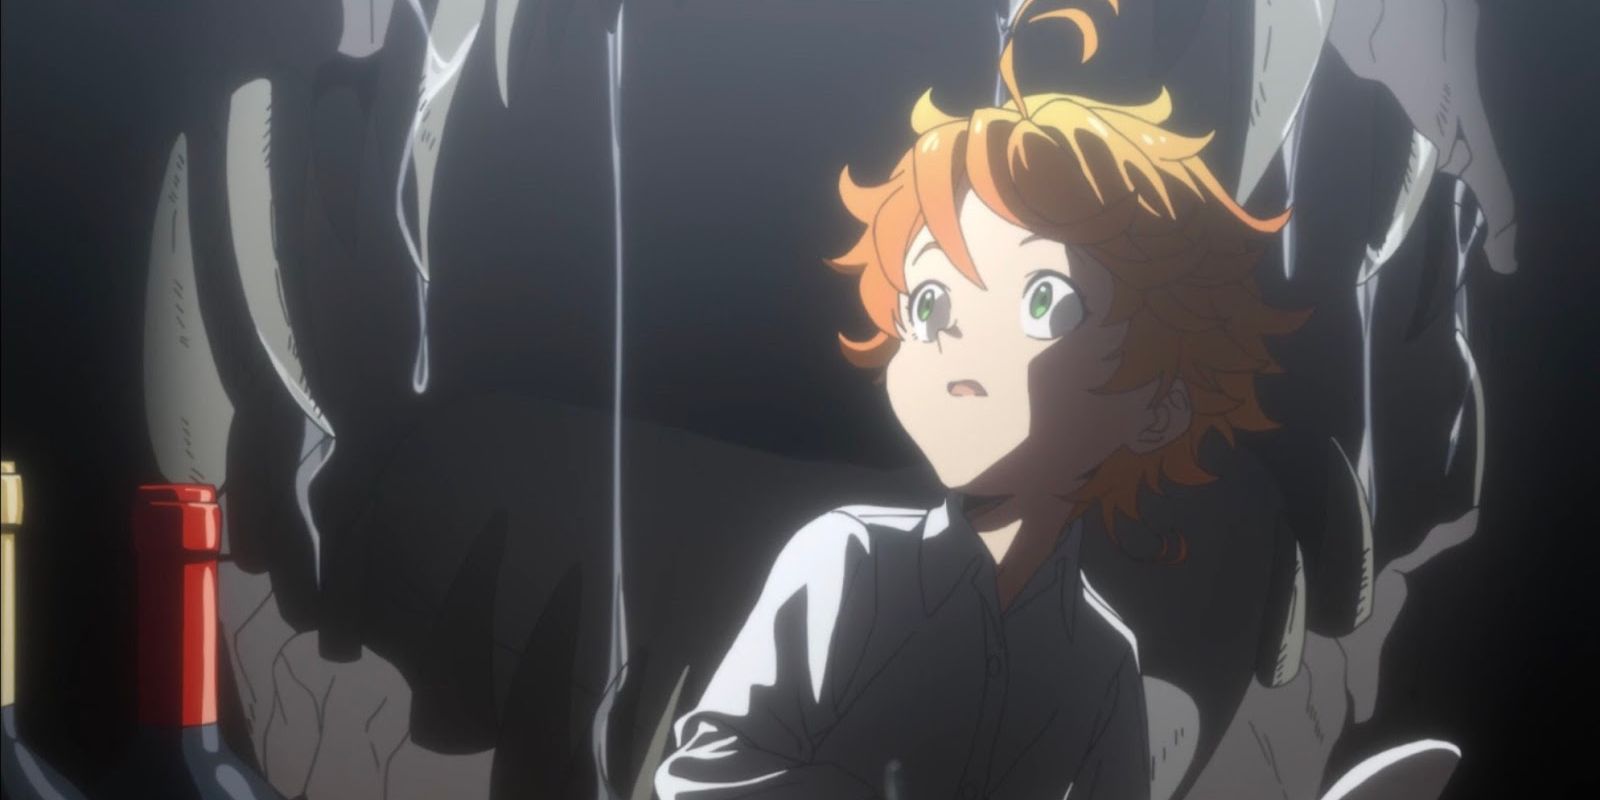 Emma scared with a demon opening its jaw behind her in The Promised Neverland.